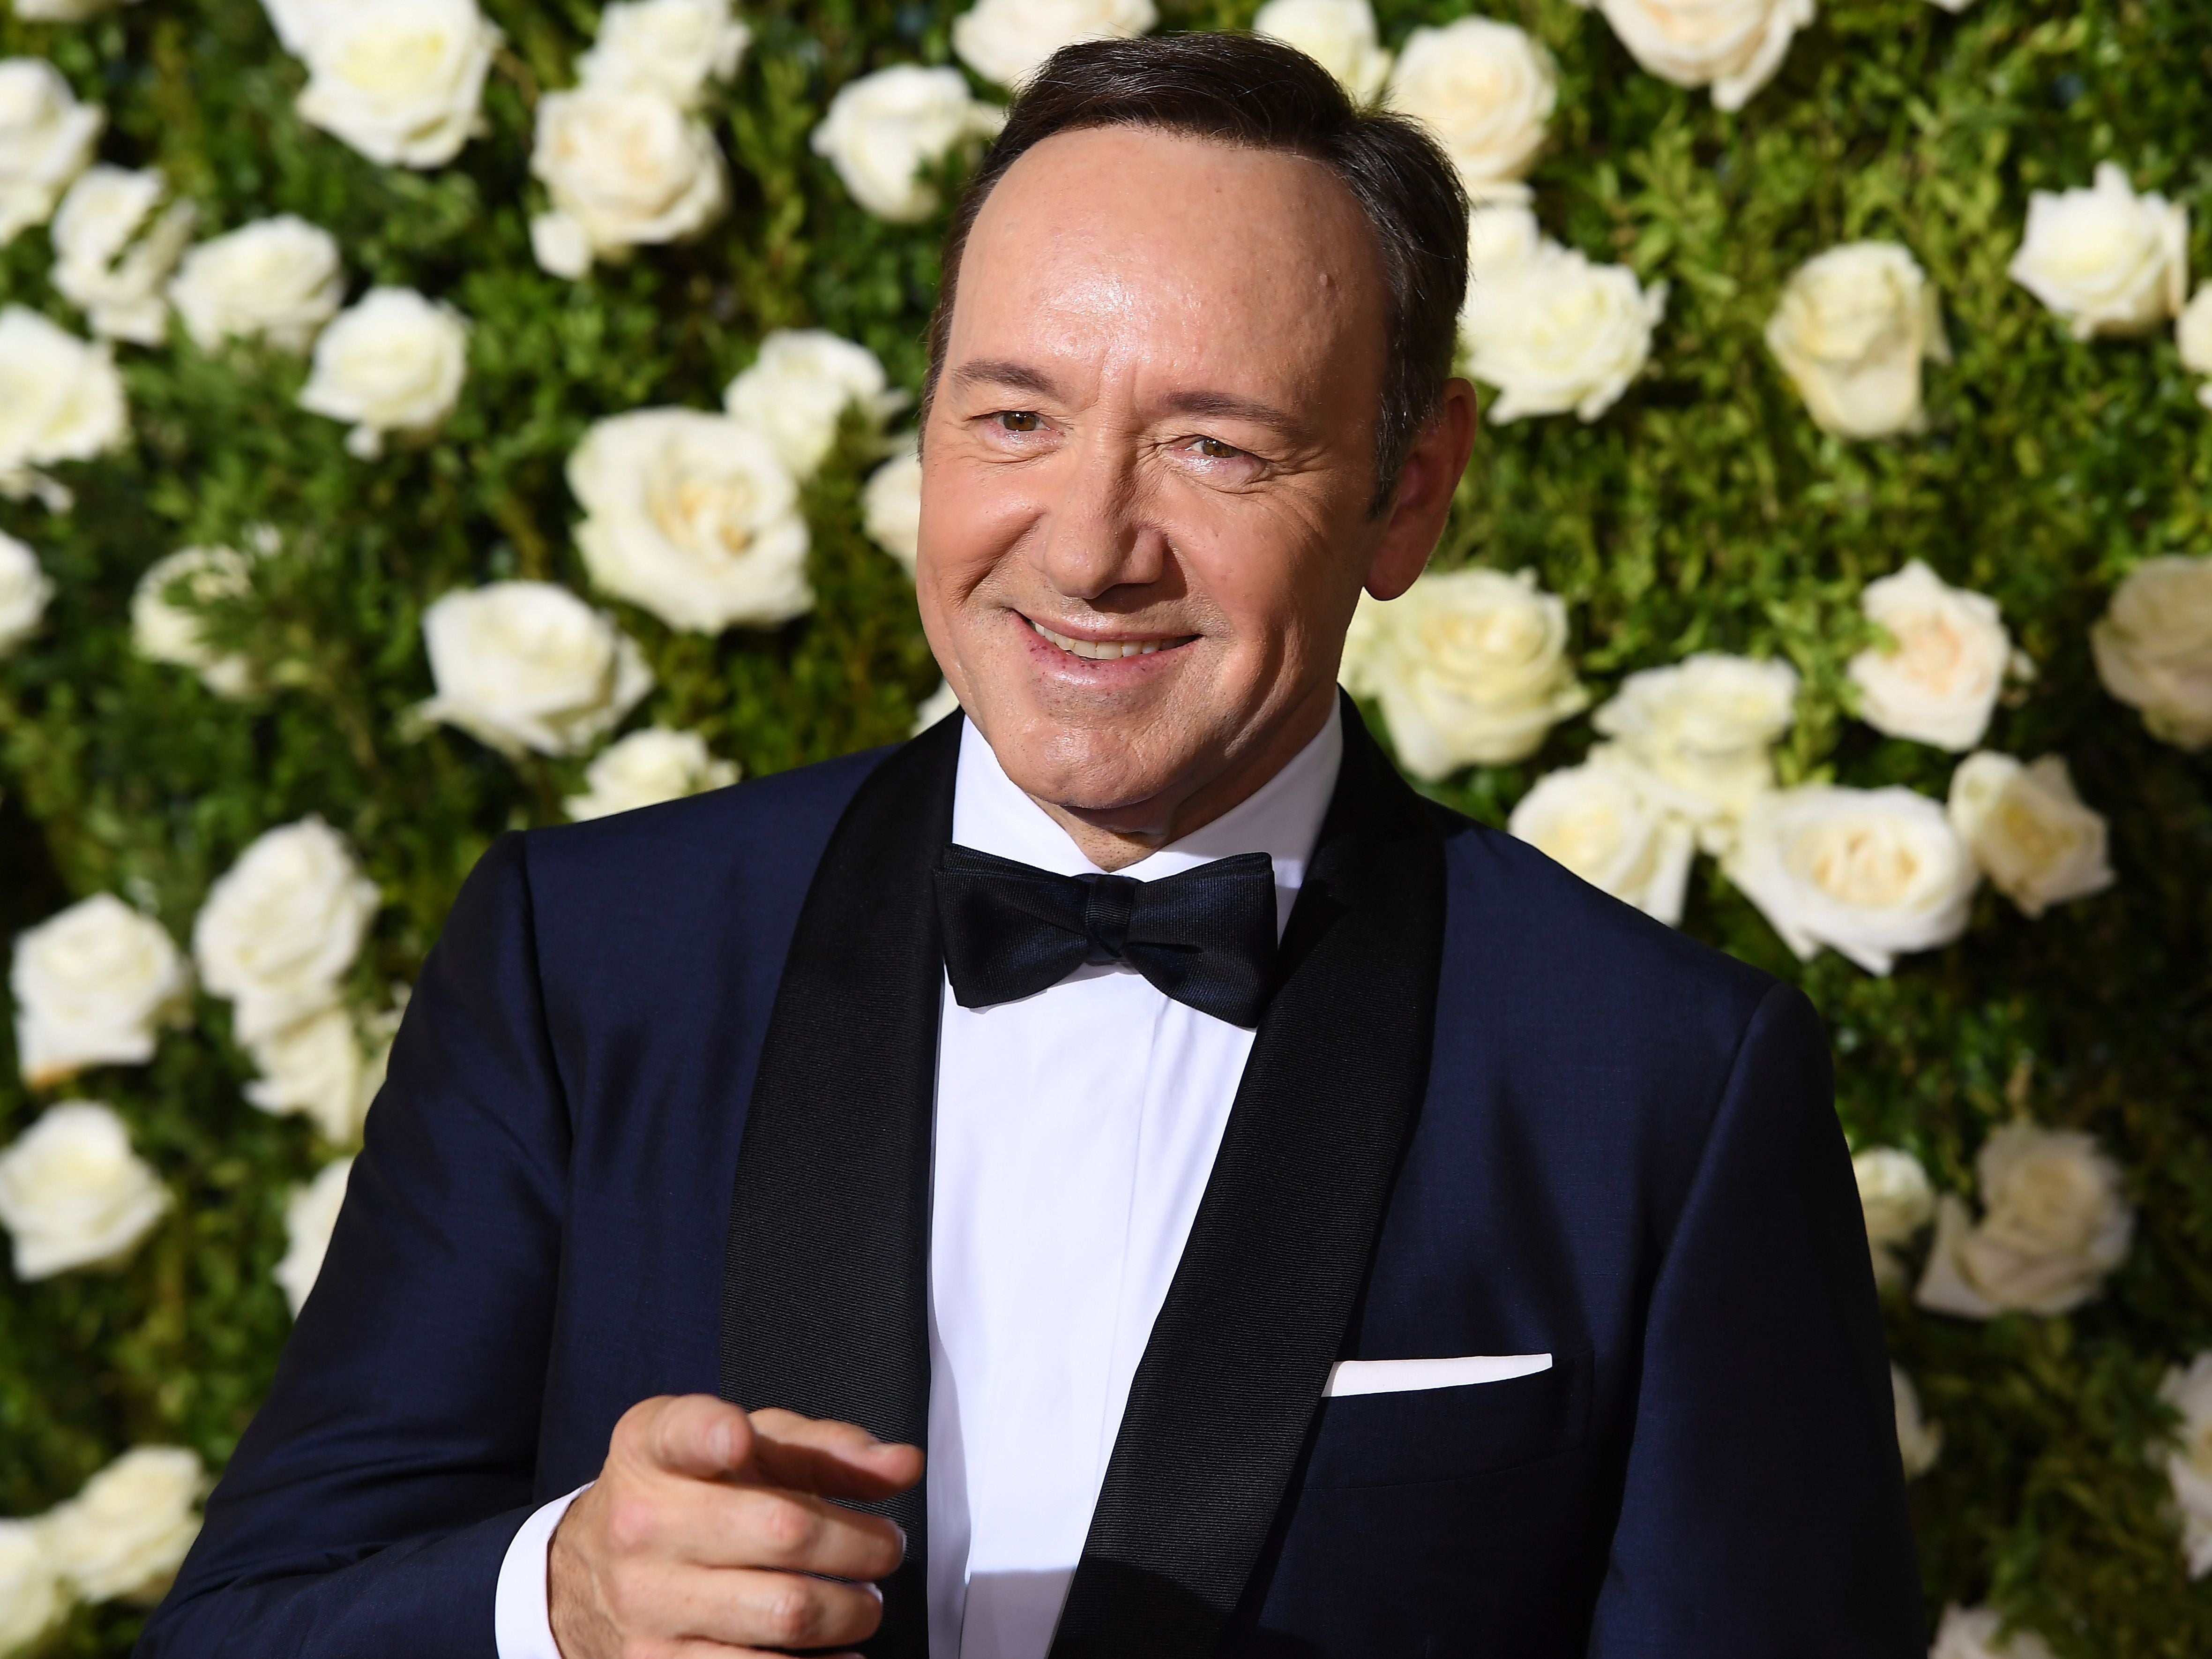 Spacey in 2017